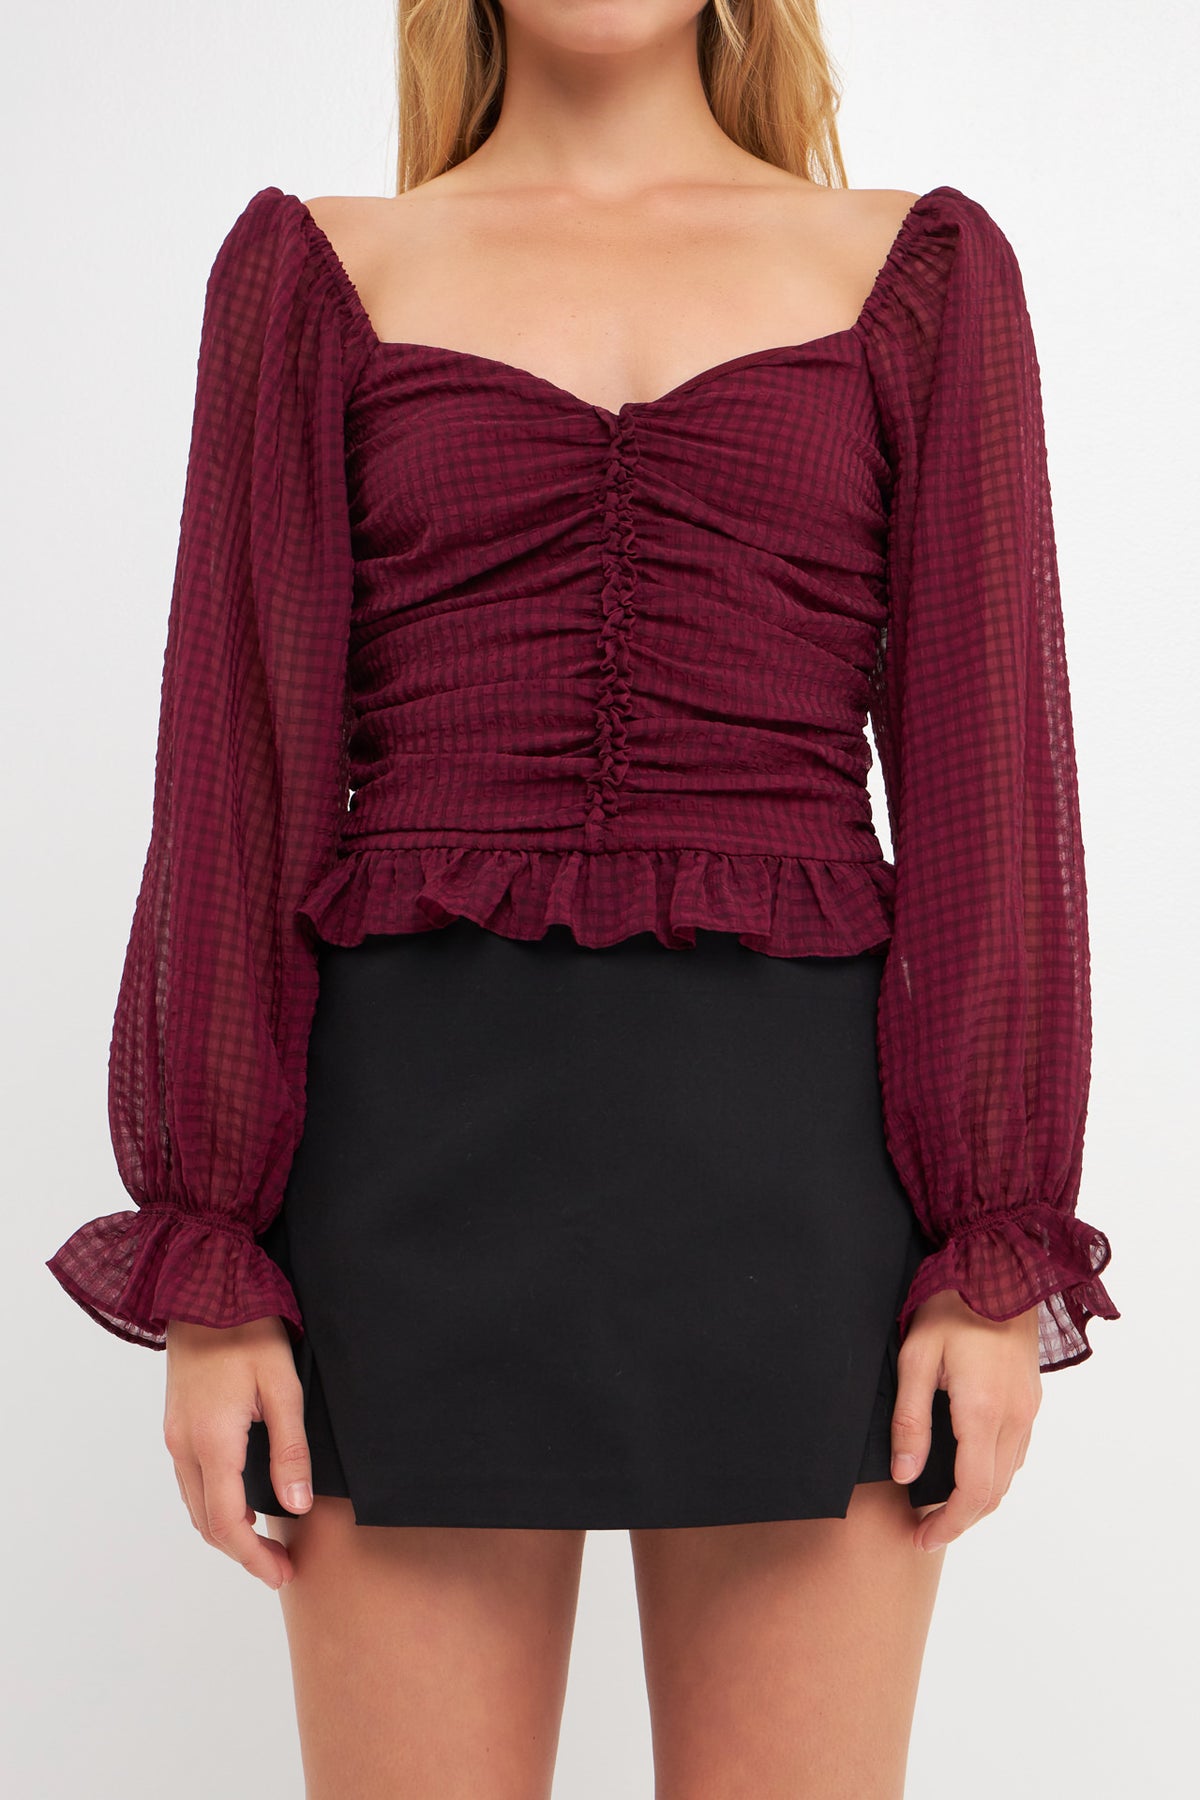 ENDLESS ROSE - Chiffon Gridded Ruched Top - TOPS available at Objectrare